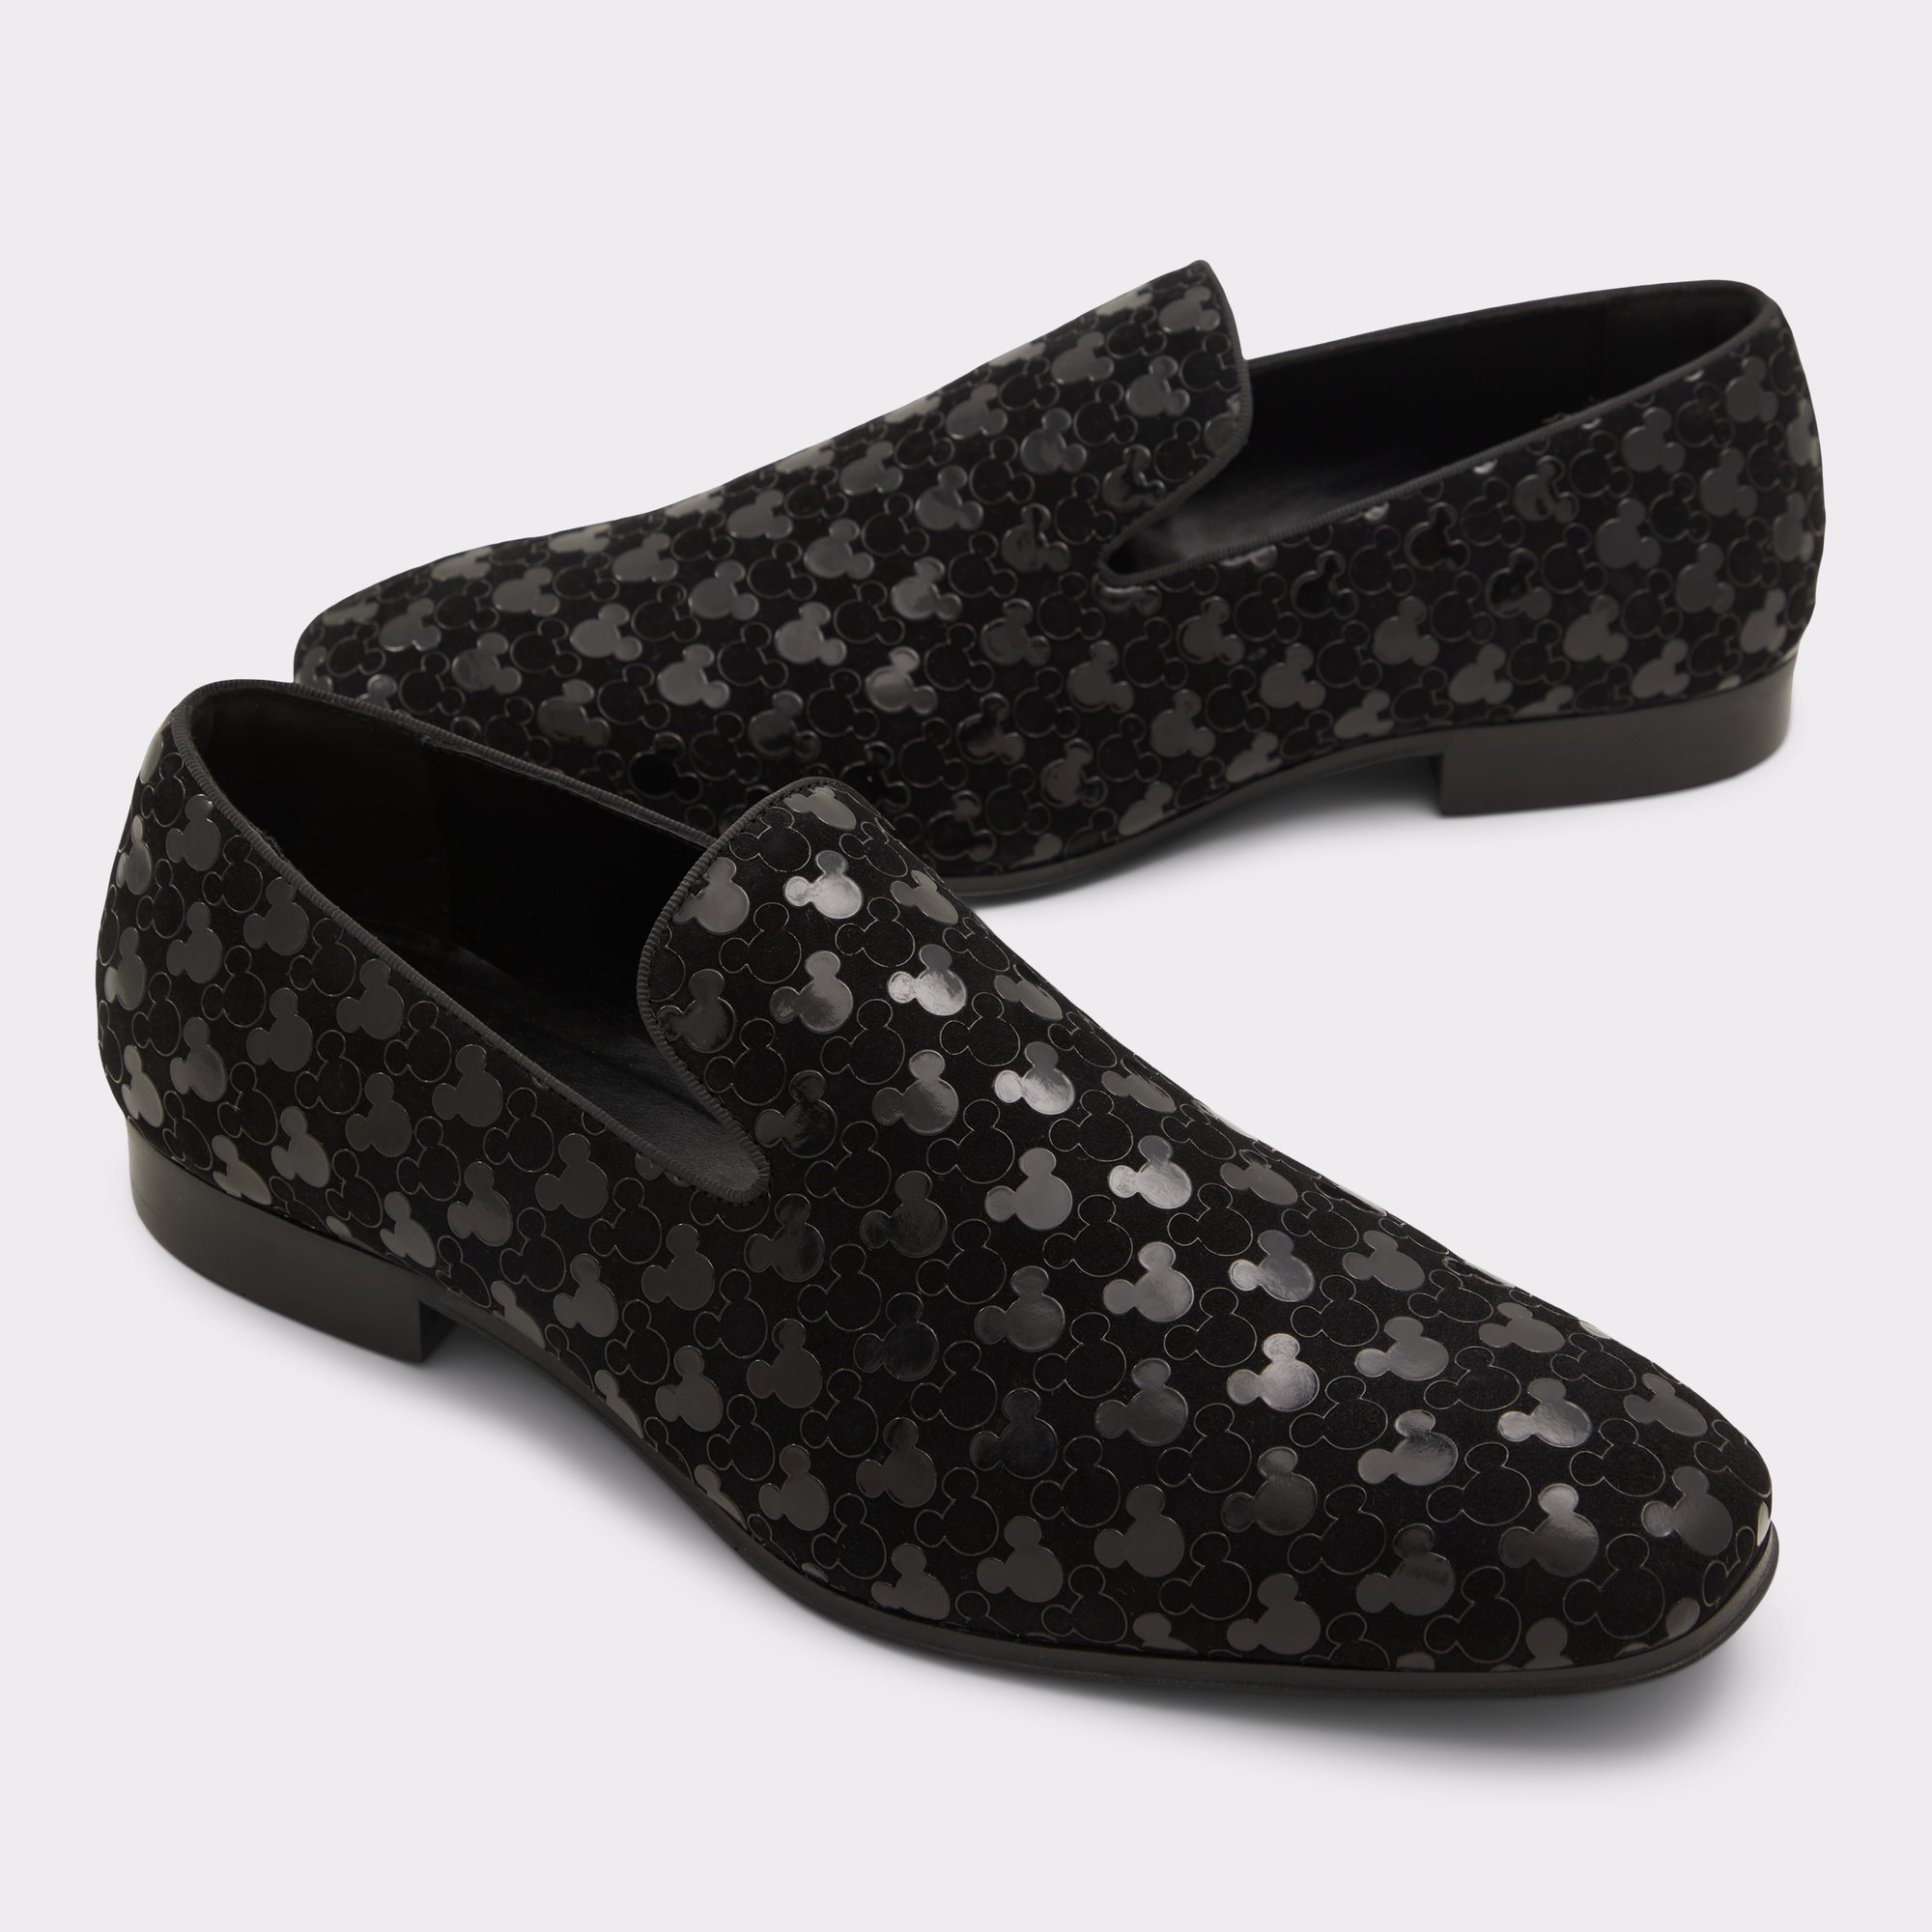 Louis Vuitton Mens Loafers & Slip-Ons, Black, 11 (Stock Confirmation Required)